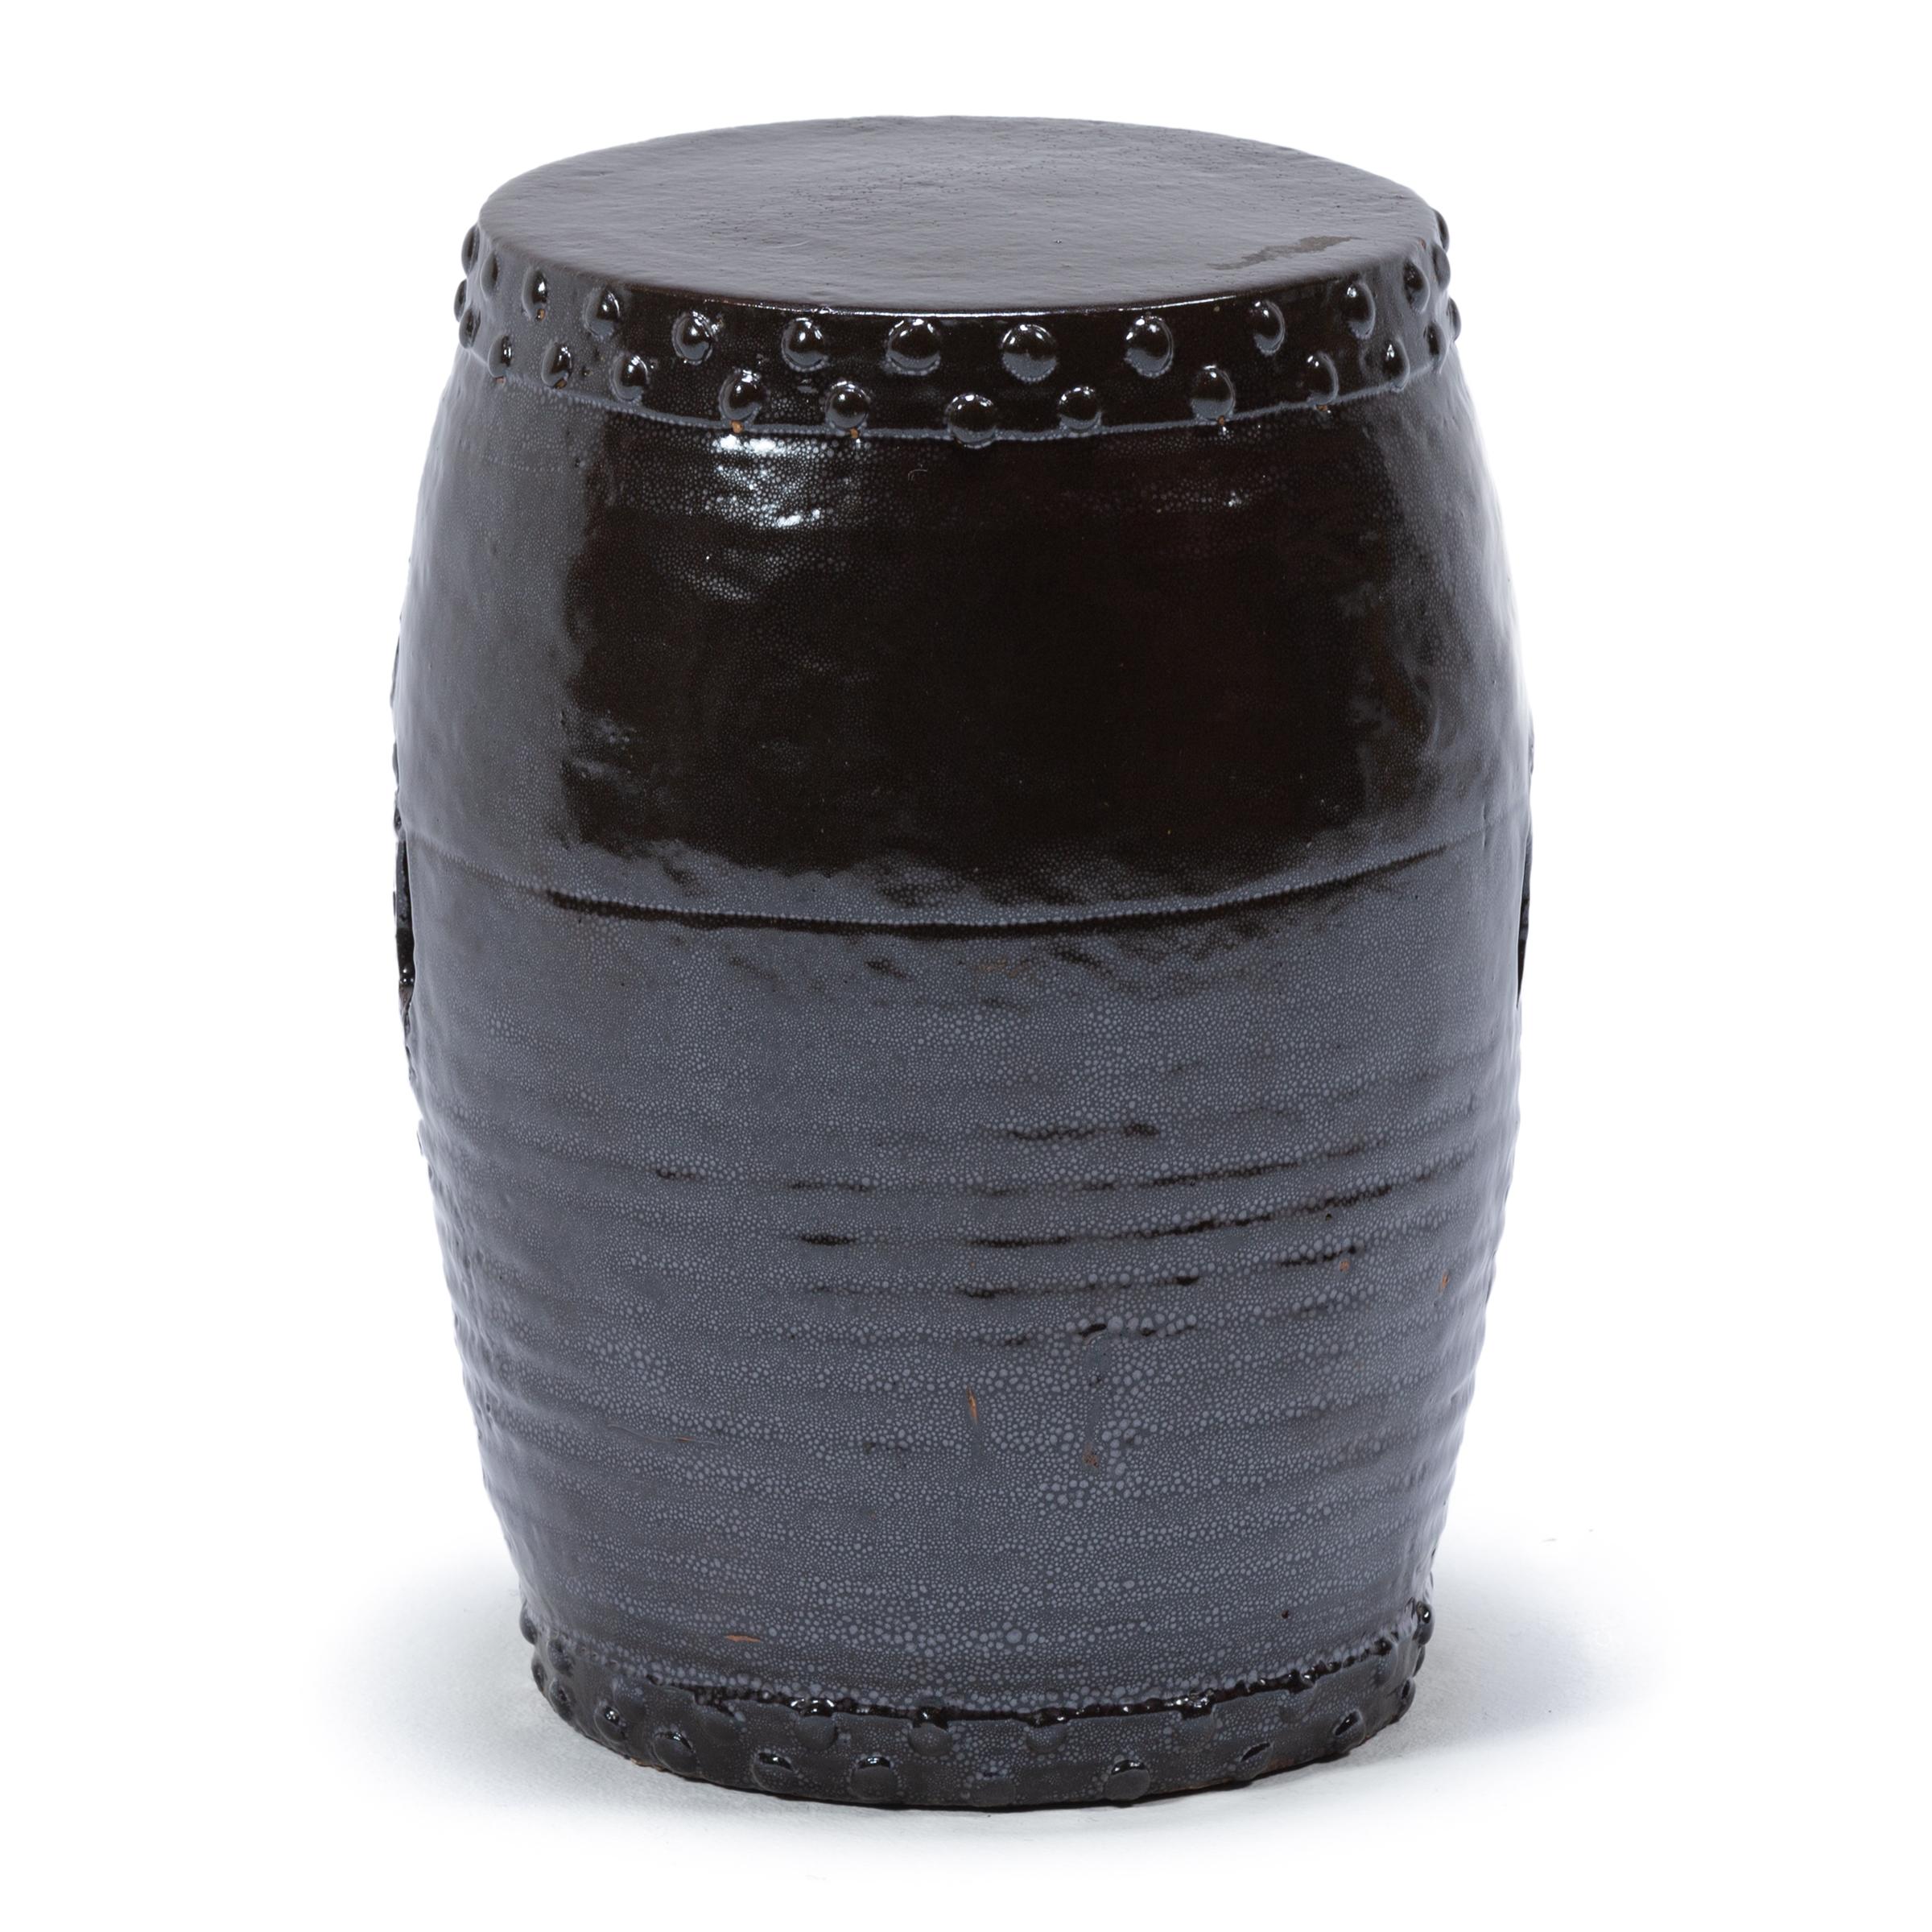 This early 20th century garden stool from China's Zhejiang province keeps with tradition with its simple drum-form shape, cloaked in a dark brown glaze. Ringing both the top and bottom, a pattern of boss-head nails imitates those used to stretch a